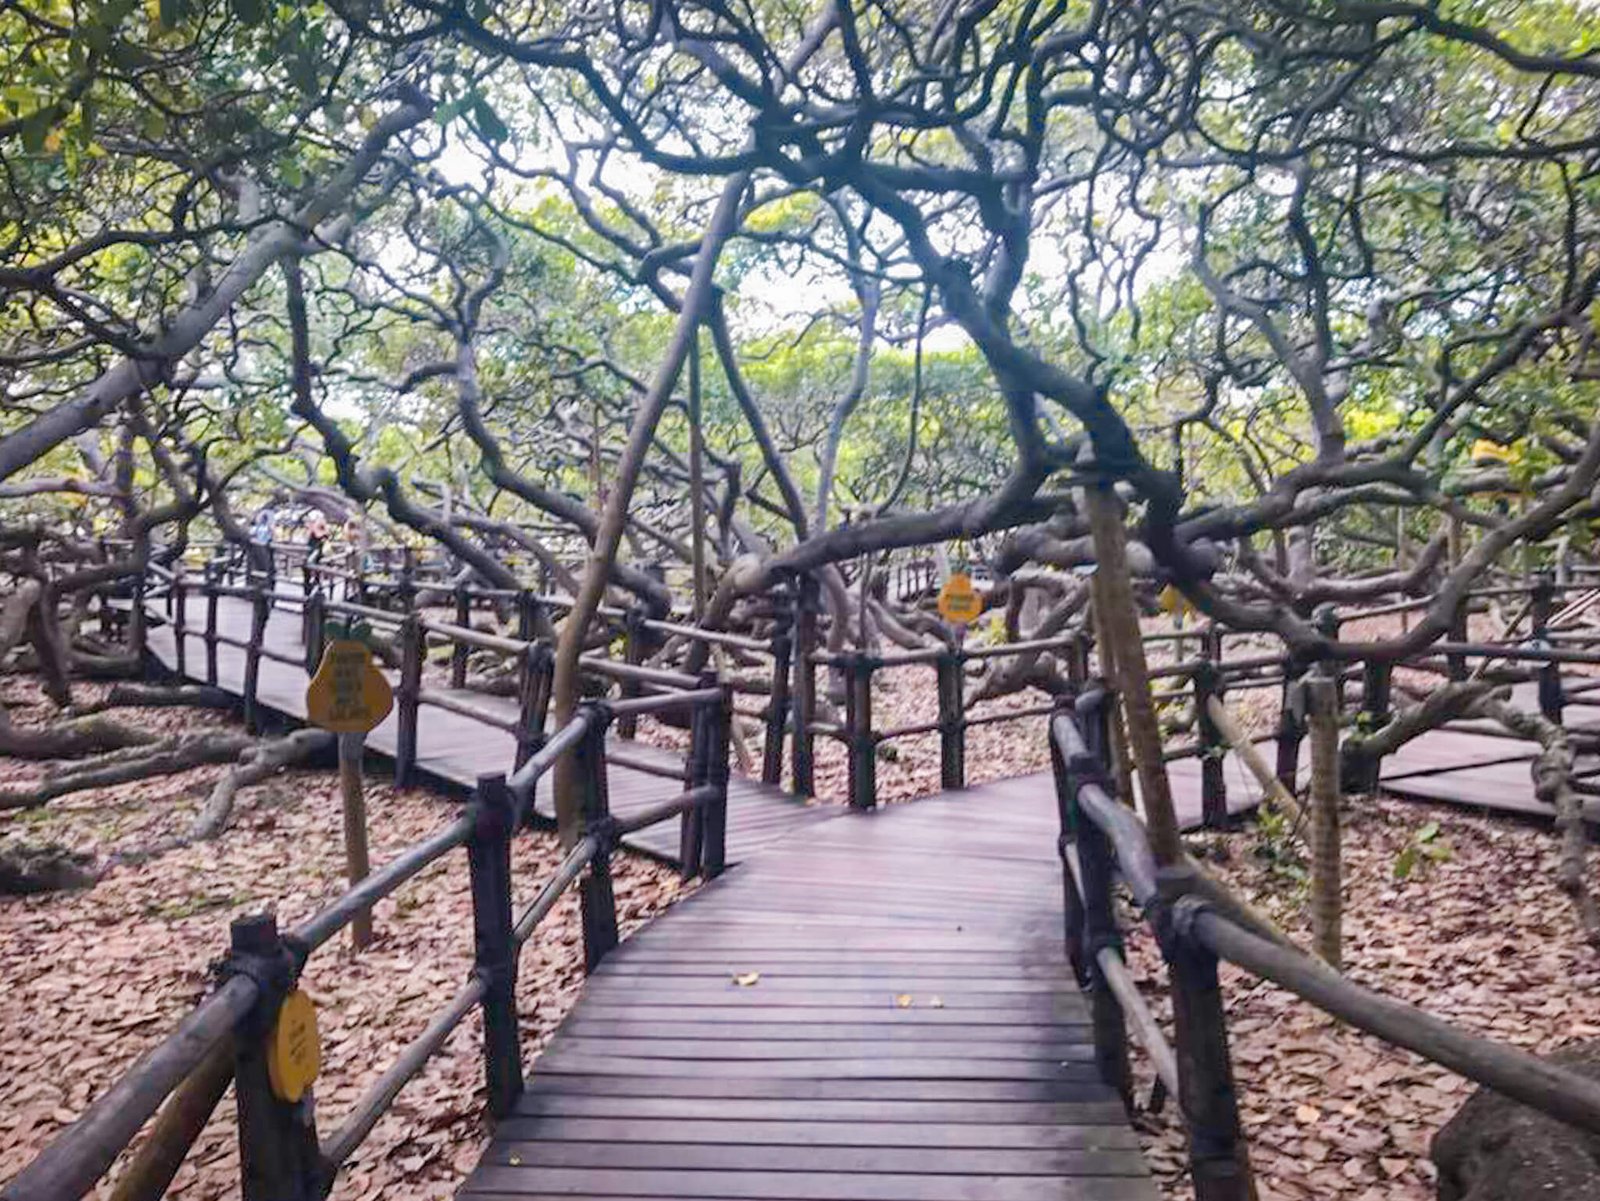 the world's biggest Cashew tree, things to do in Natal, Brazil